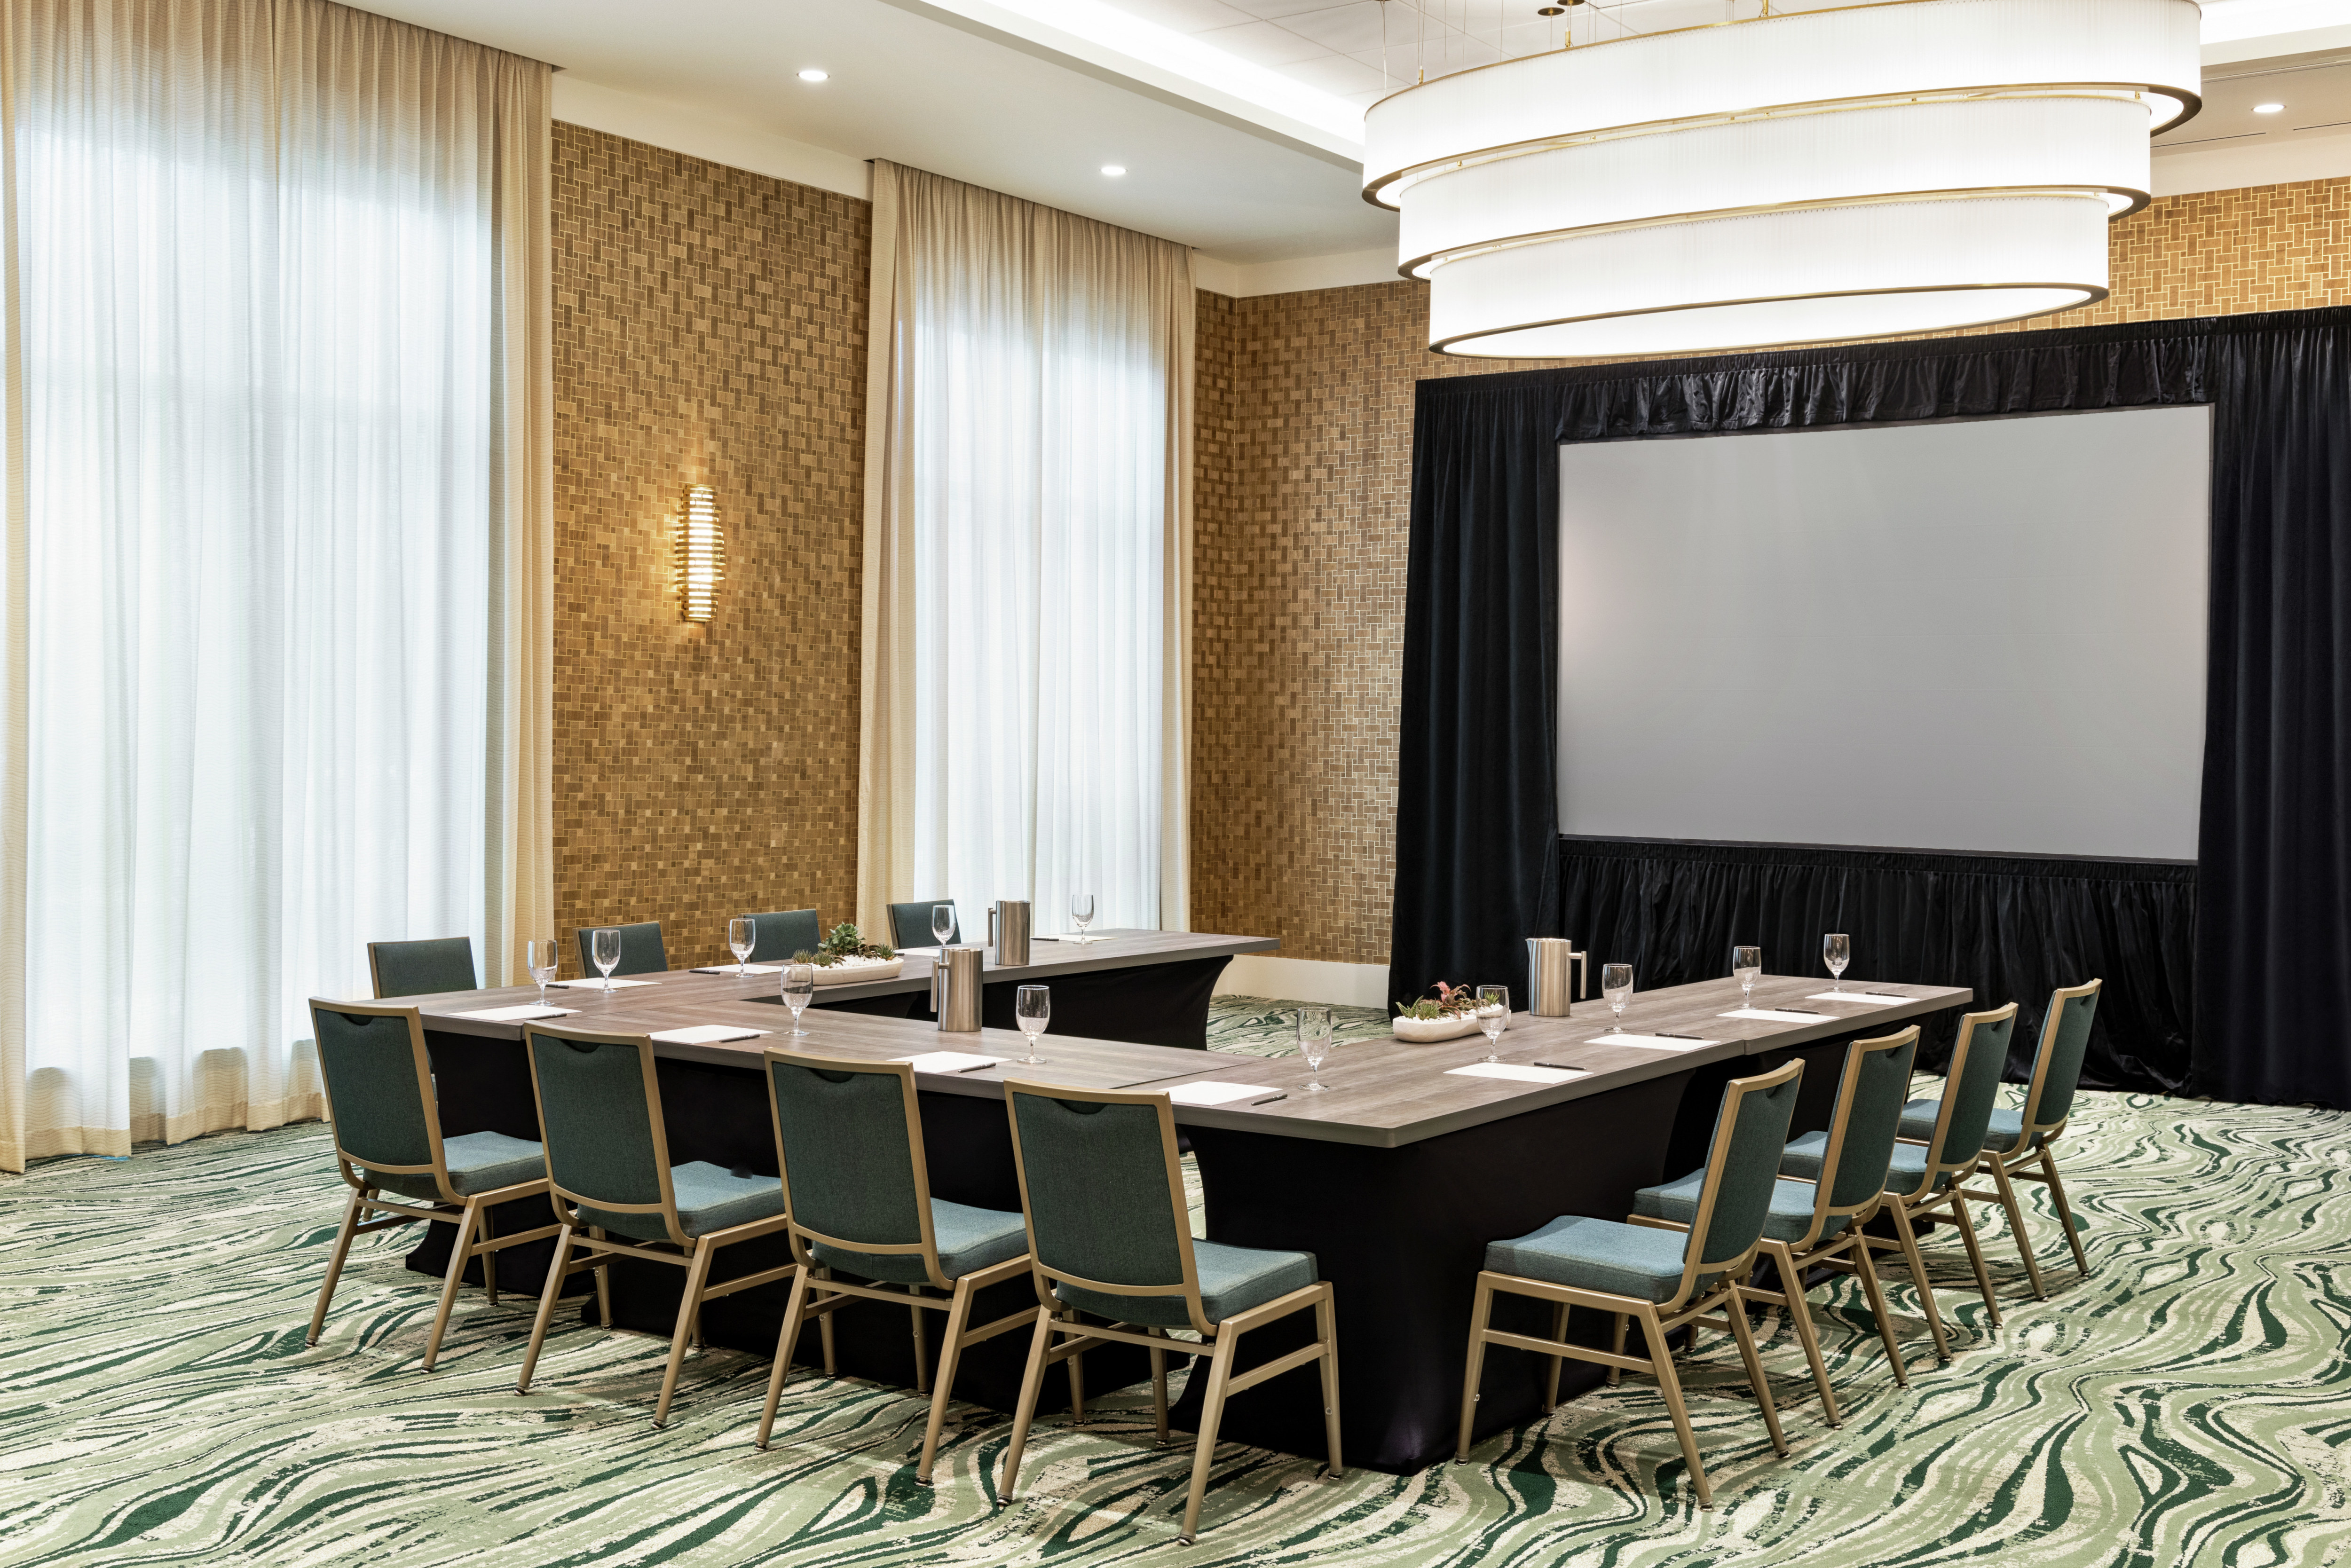 Spacious on-site meeting room featuring U-shape table setup and large projector screen at front of the room